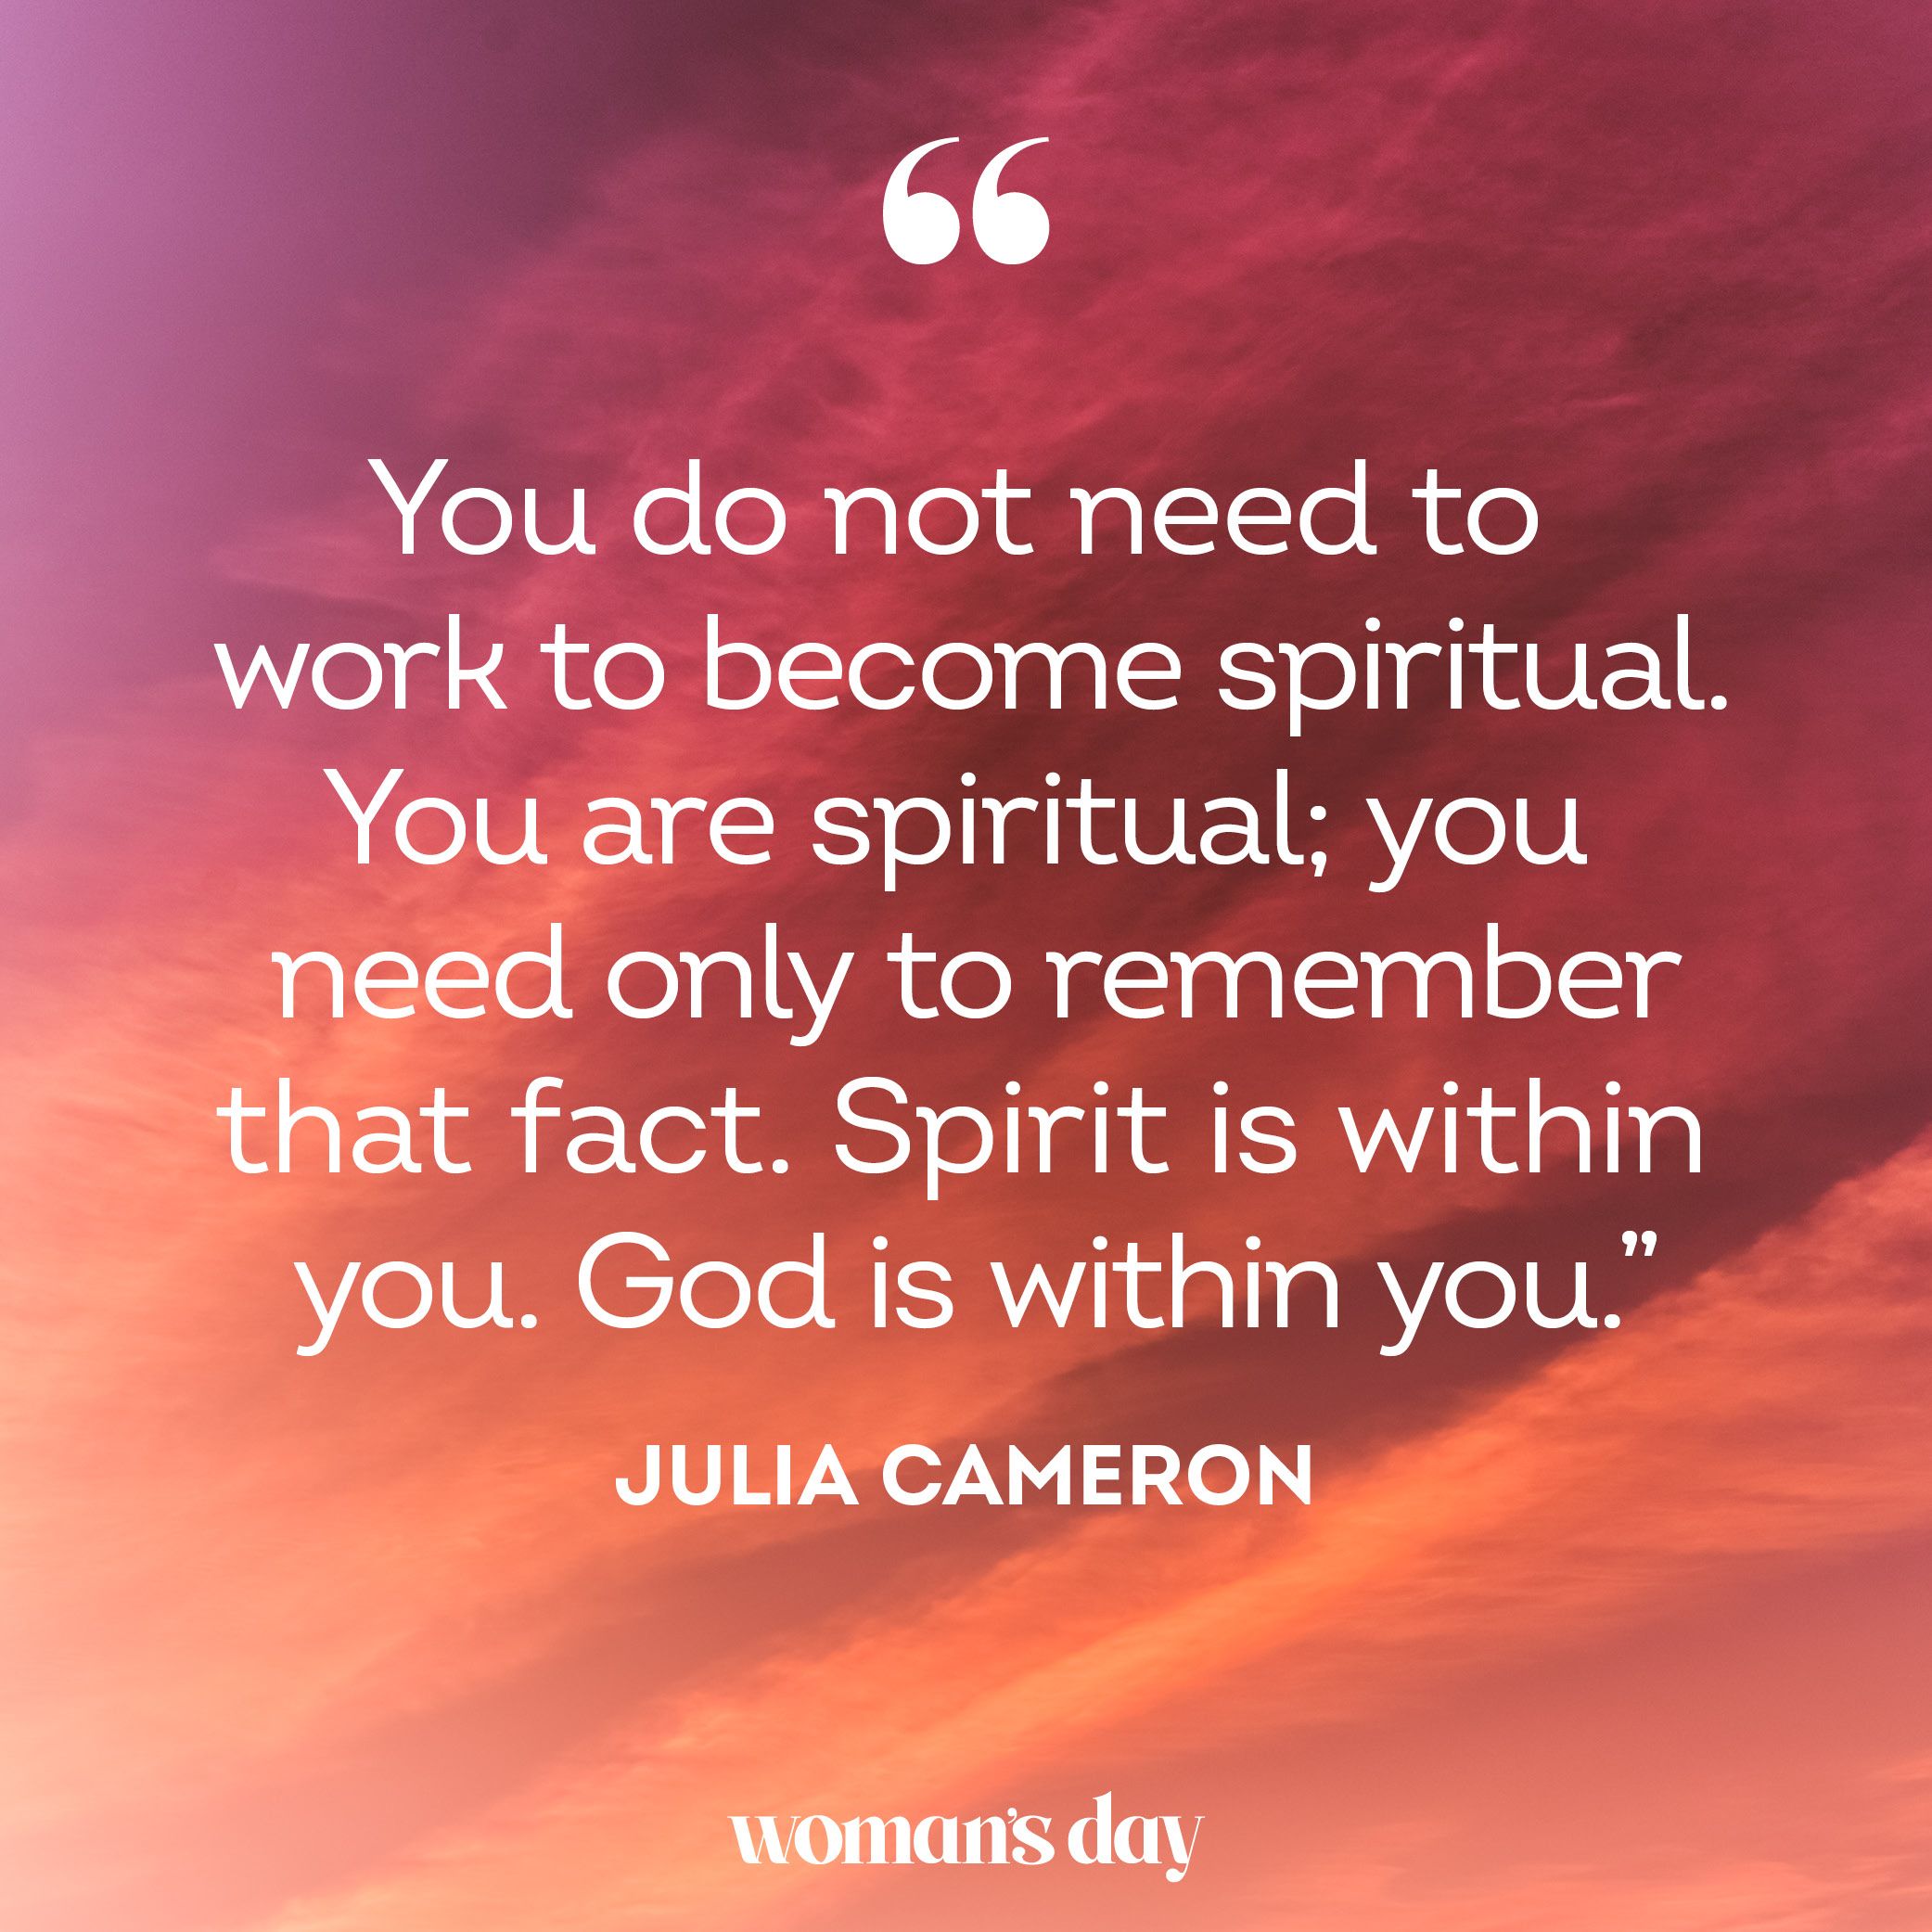 Spiritual Quote Of The Day - Hadria Jaquenette